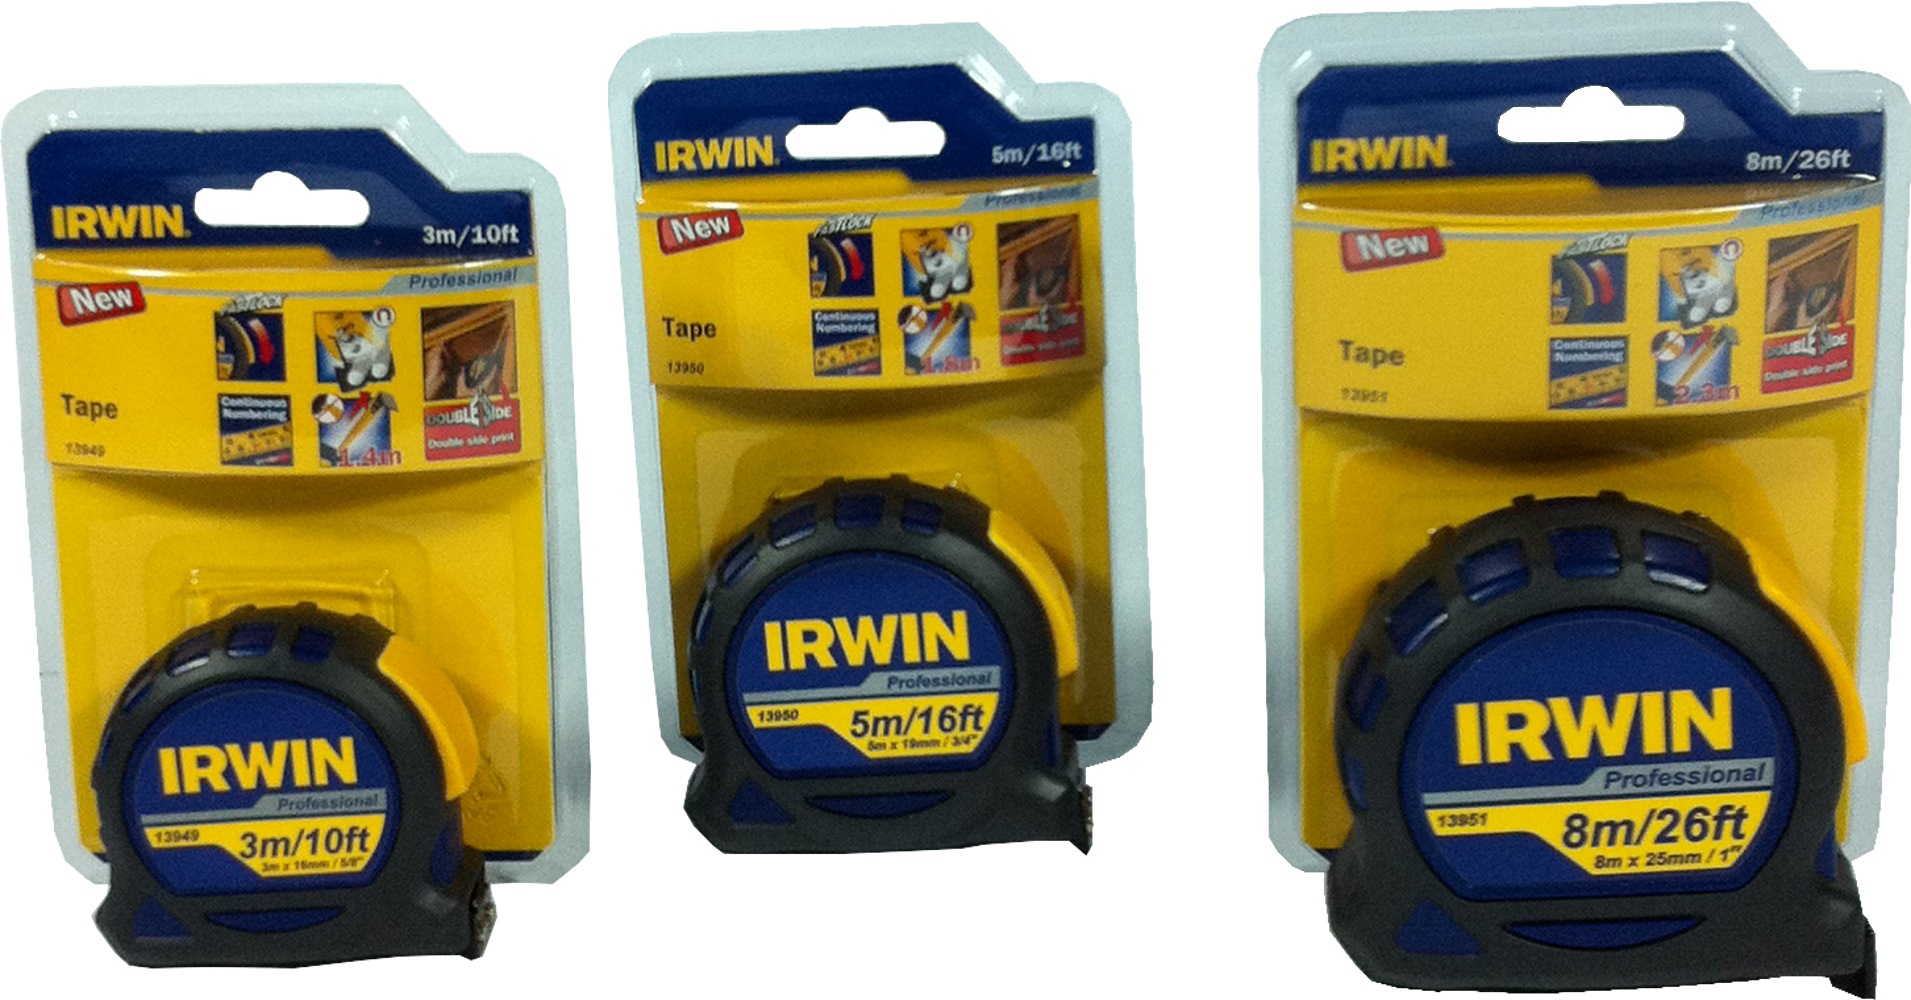 IRWIN MAGNETIC TIP MEASURING TAPE | Measuring & Layout Tools | Horme ...